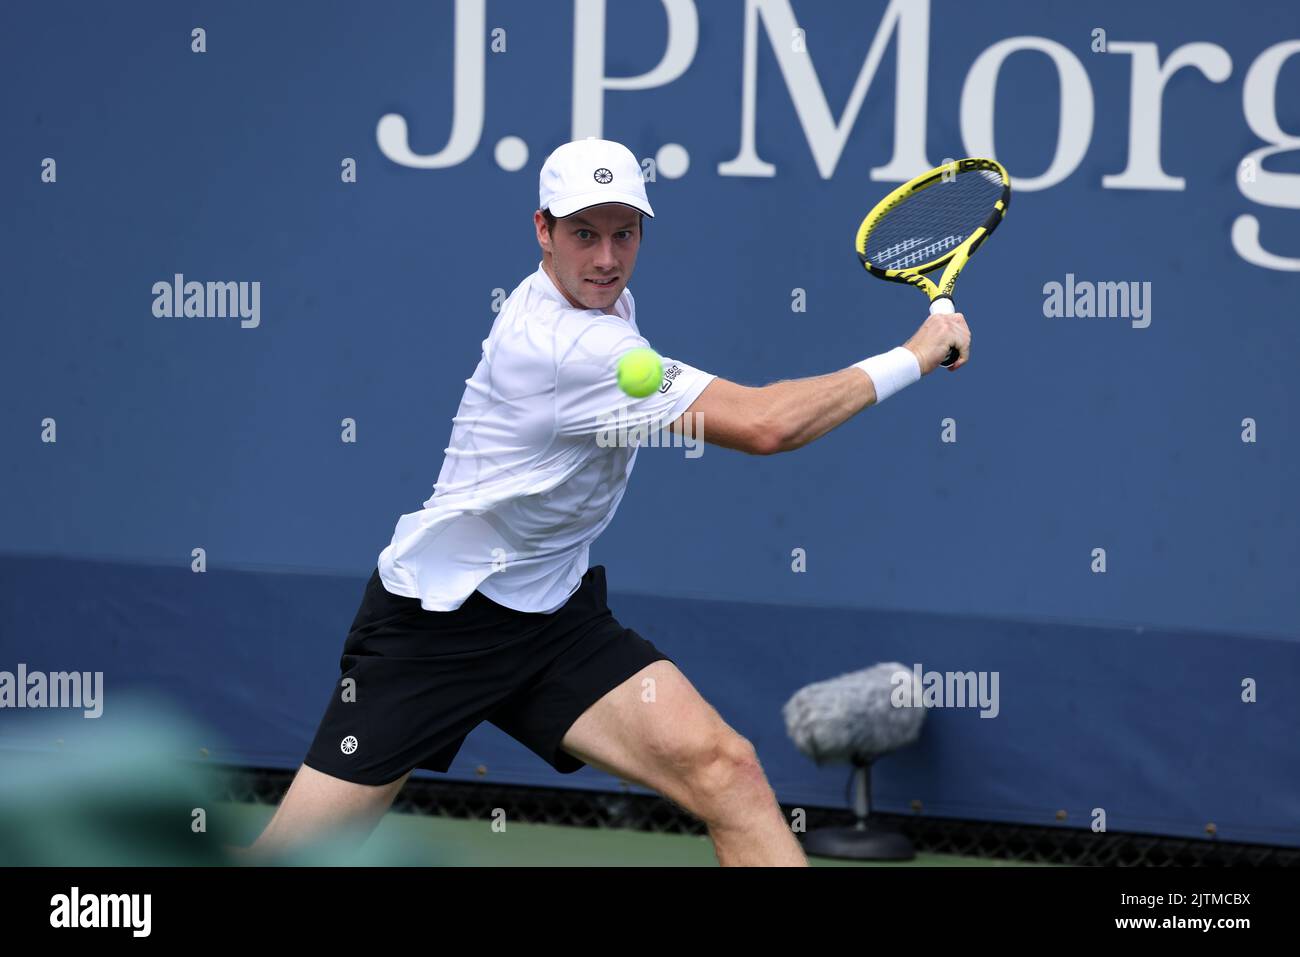 NEW YORK, NY - AUGUST 31: Botic van de Zandschulp of the Netherlands during his match against Corentin Moutet of France at USTA Billie Jean King National Tennis Center on August 30, 2022 in New York City. (Photo by Adam Stoltman/BSR Agency) Stock Photo